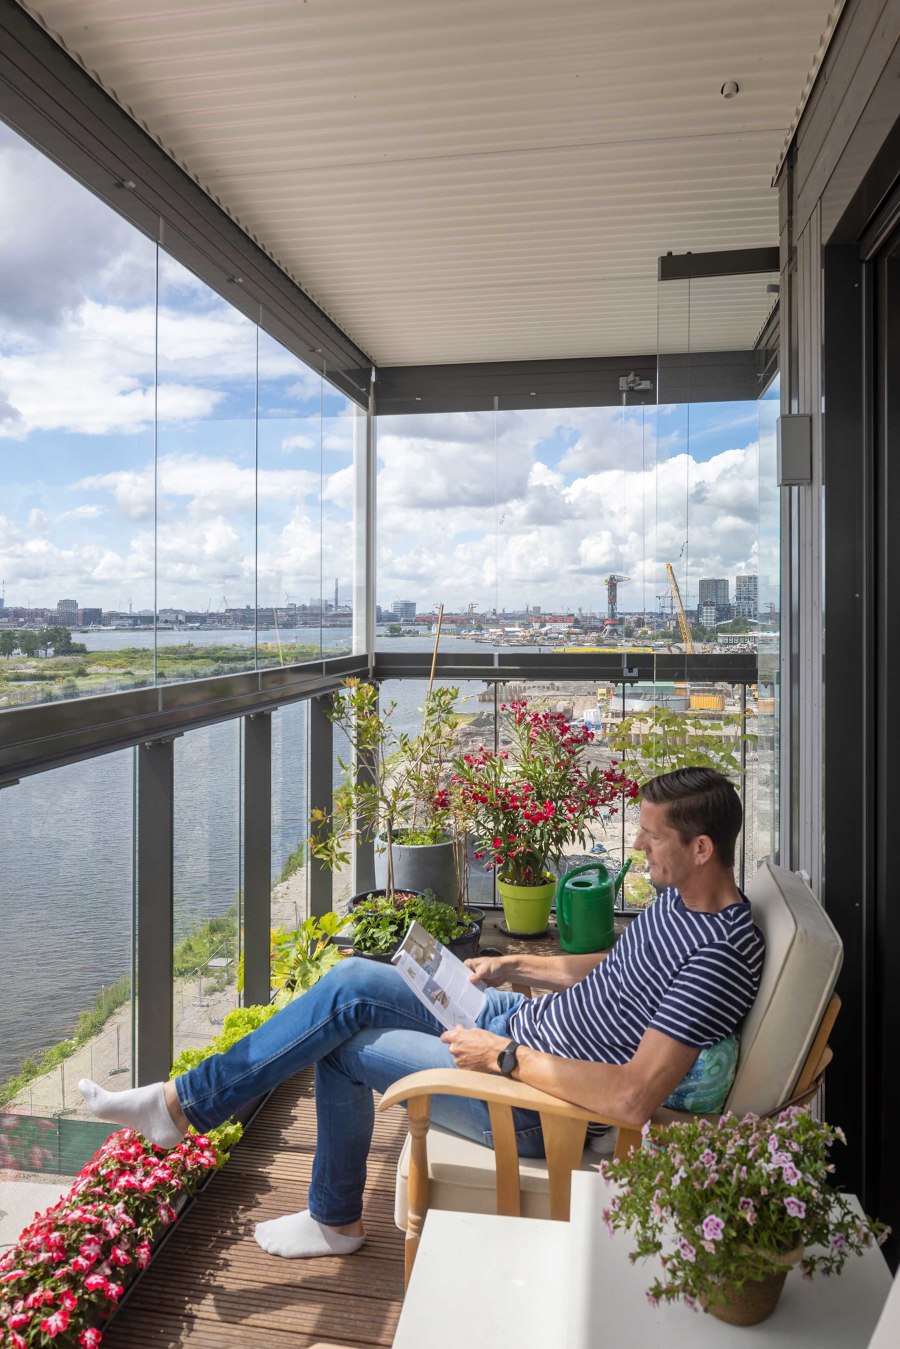 Stories of Amsterdam with balcony glazing from Solarlux | News